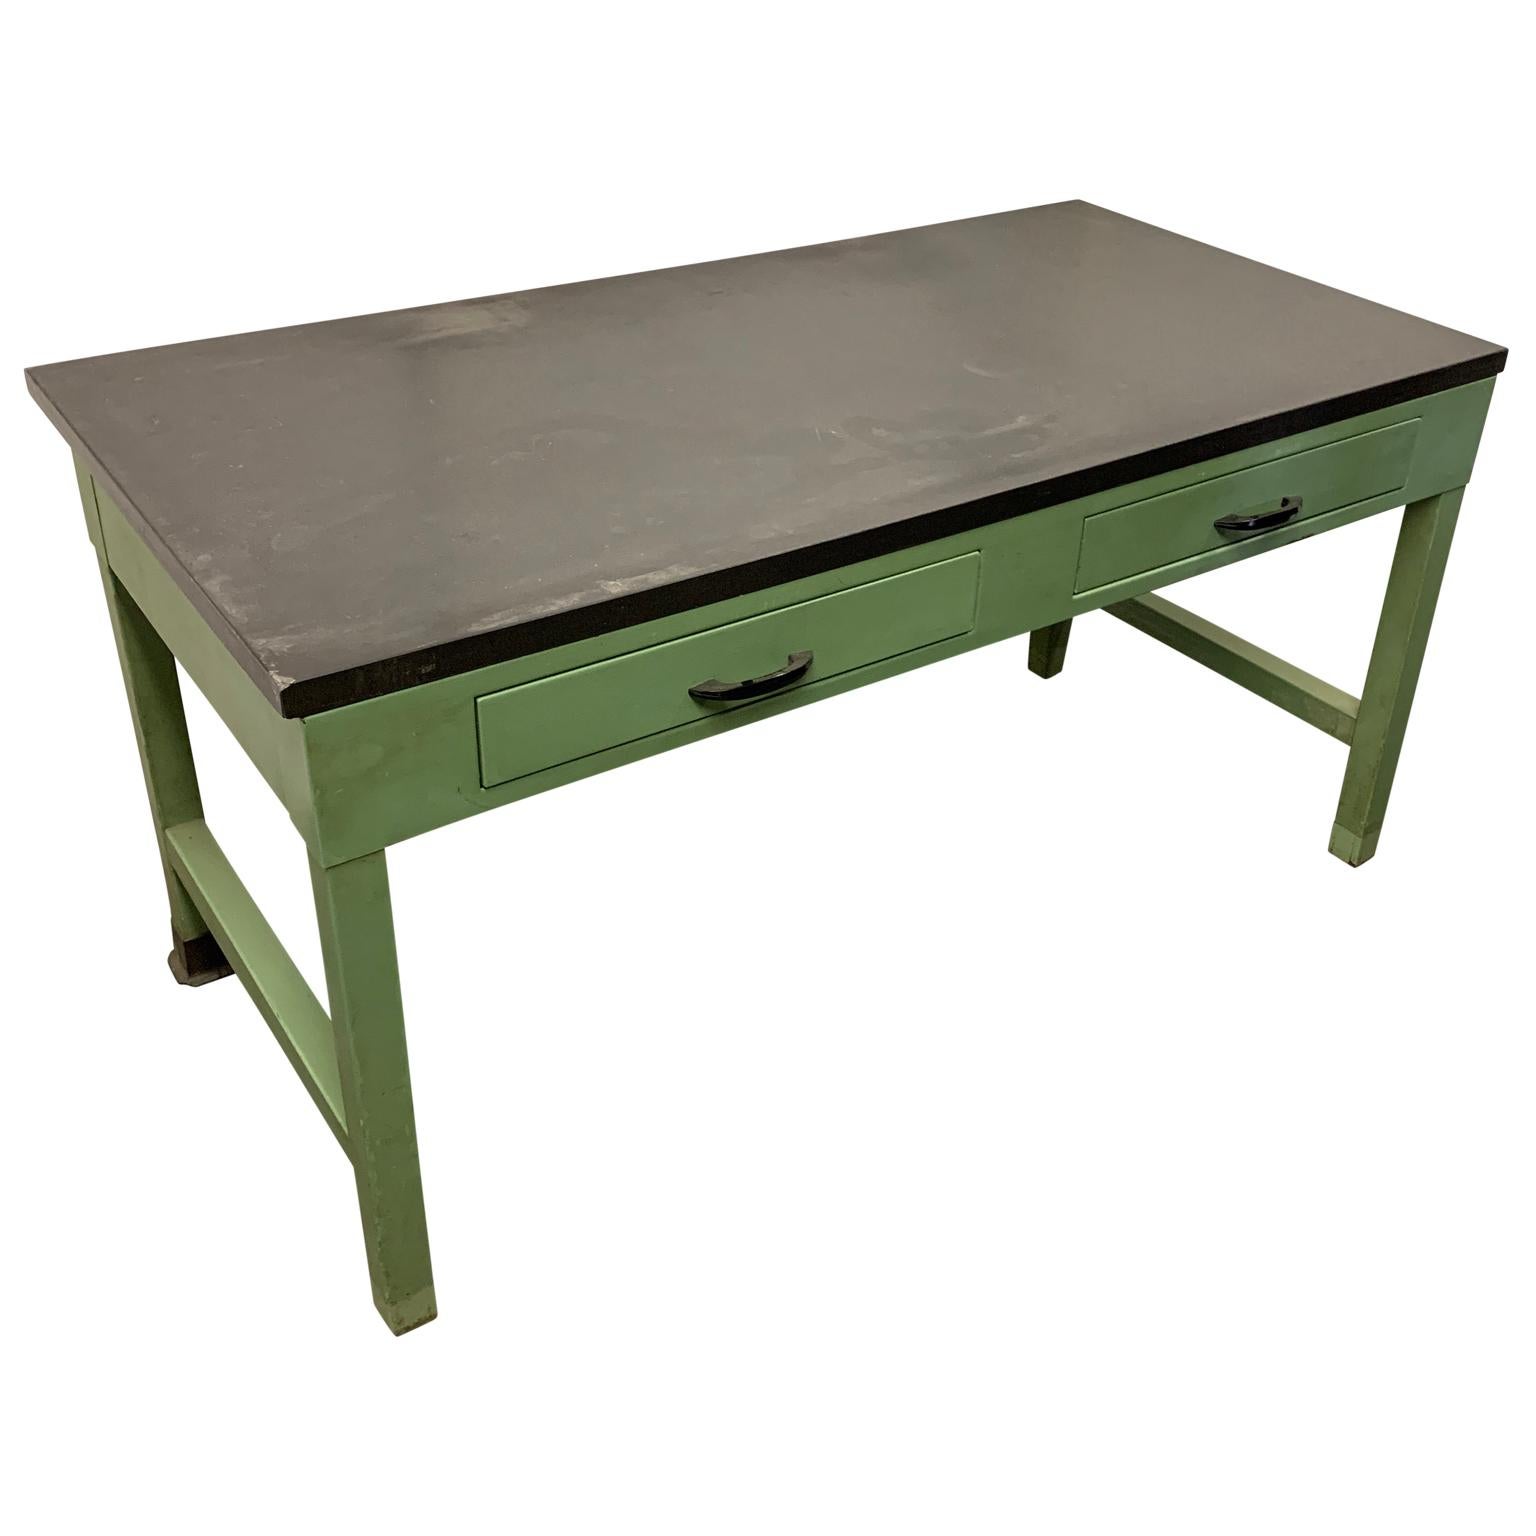 American mid-century green painted Industrial black slate top two-drawer working table.